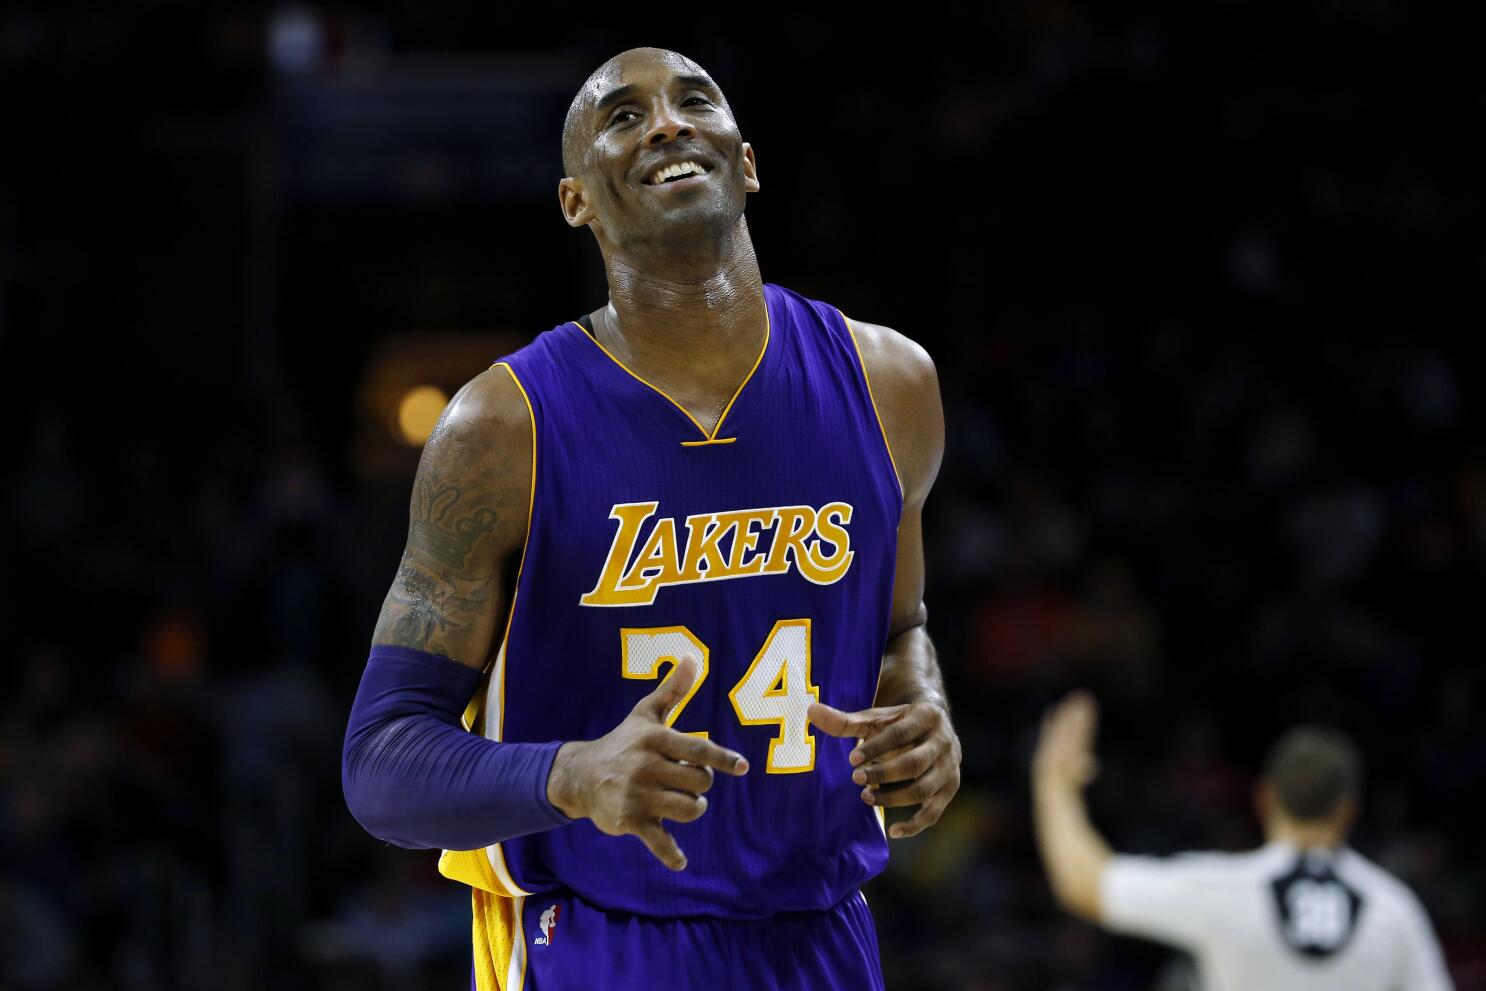 Kobe Bryant of the Los Angeles Lakers bites his jersey during a